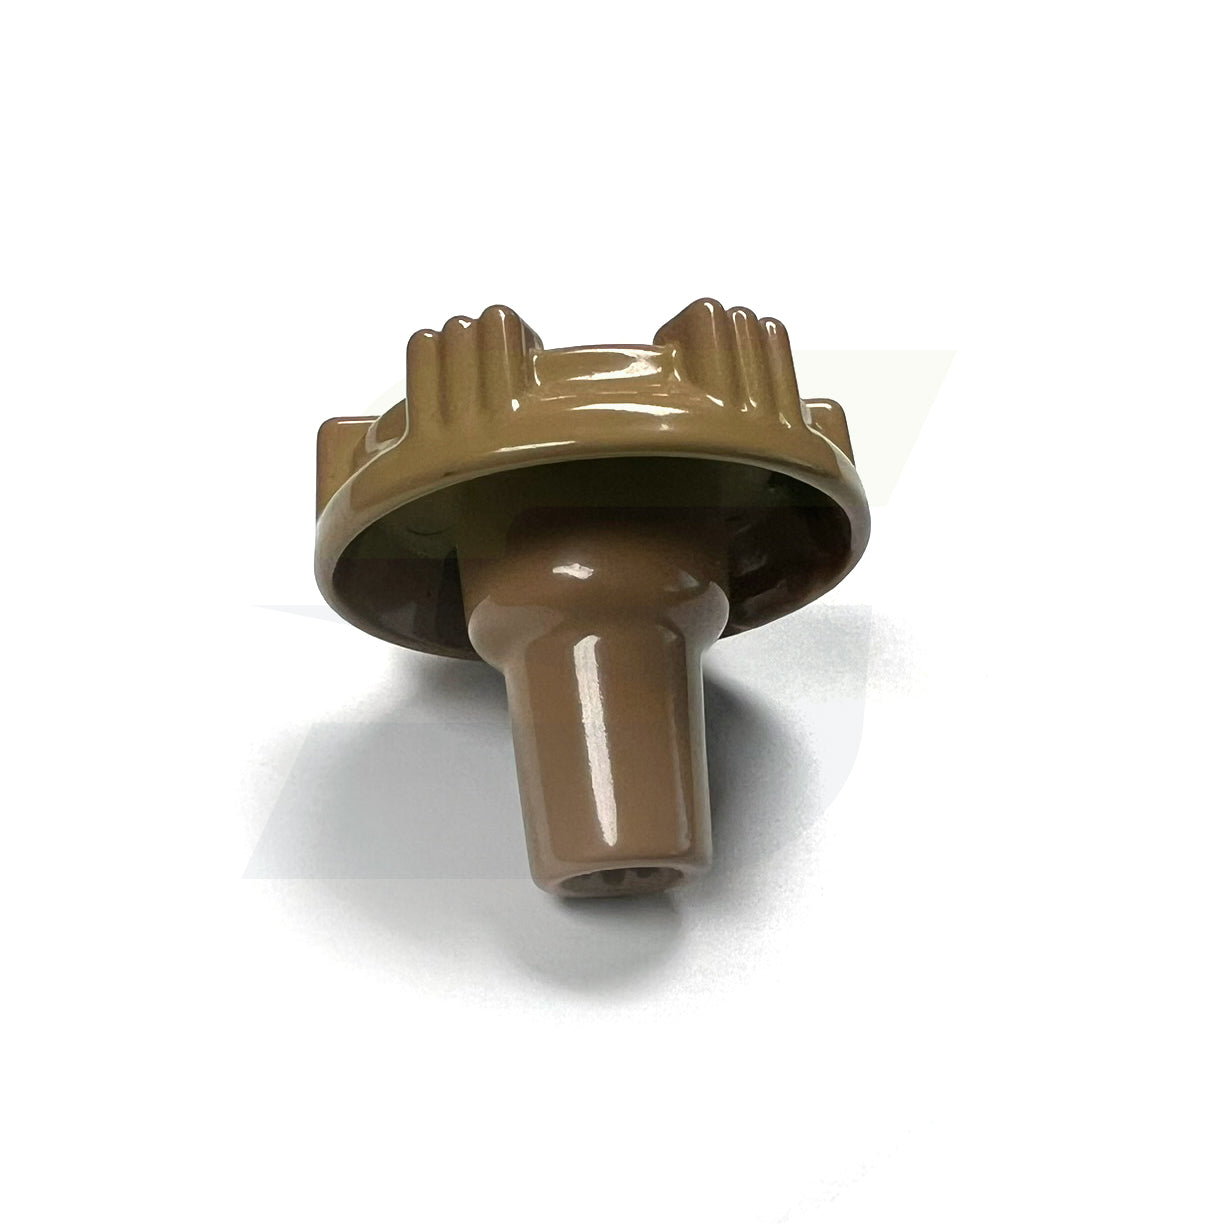 30096 - Replacement Wheel Handle for Model 14 and 17 Wall Faucets - Powder Coated Metal